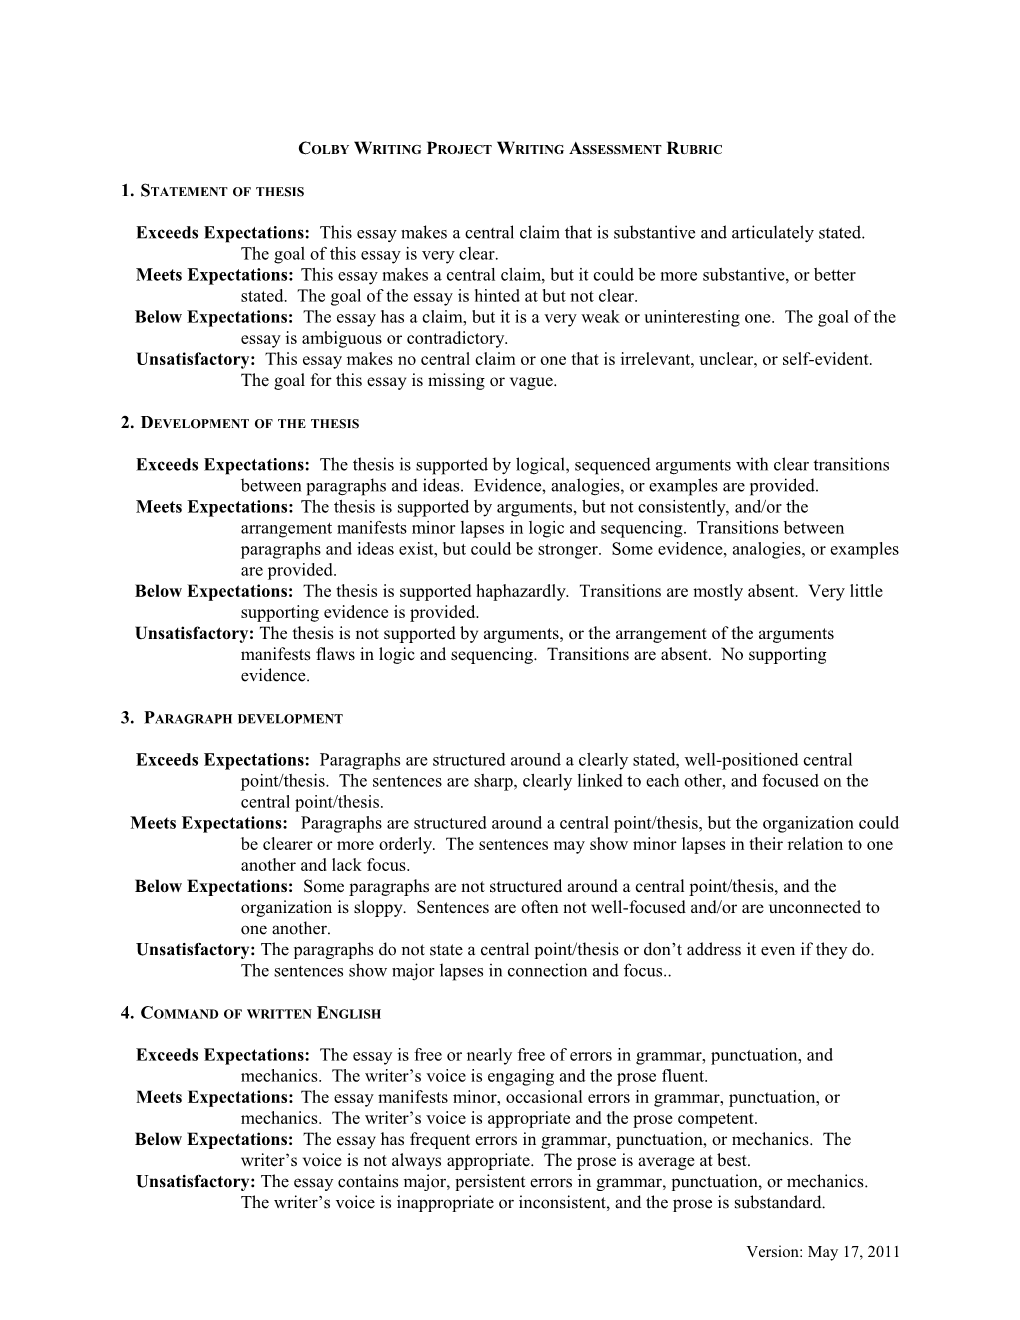 Colby Writing Project Writing Assessment Rubric